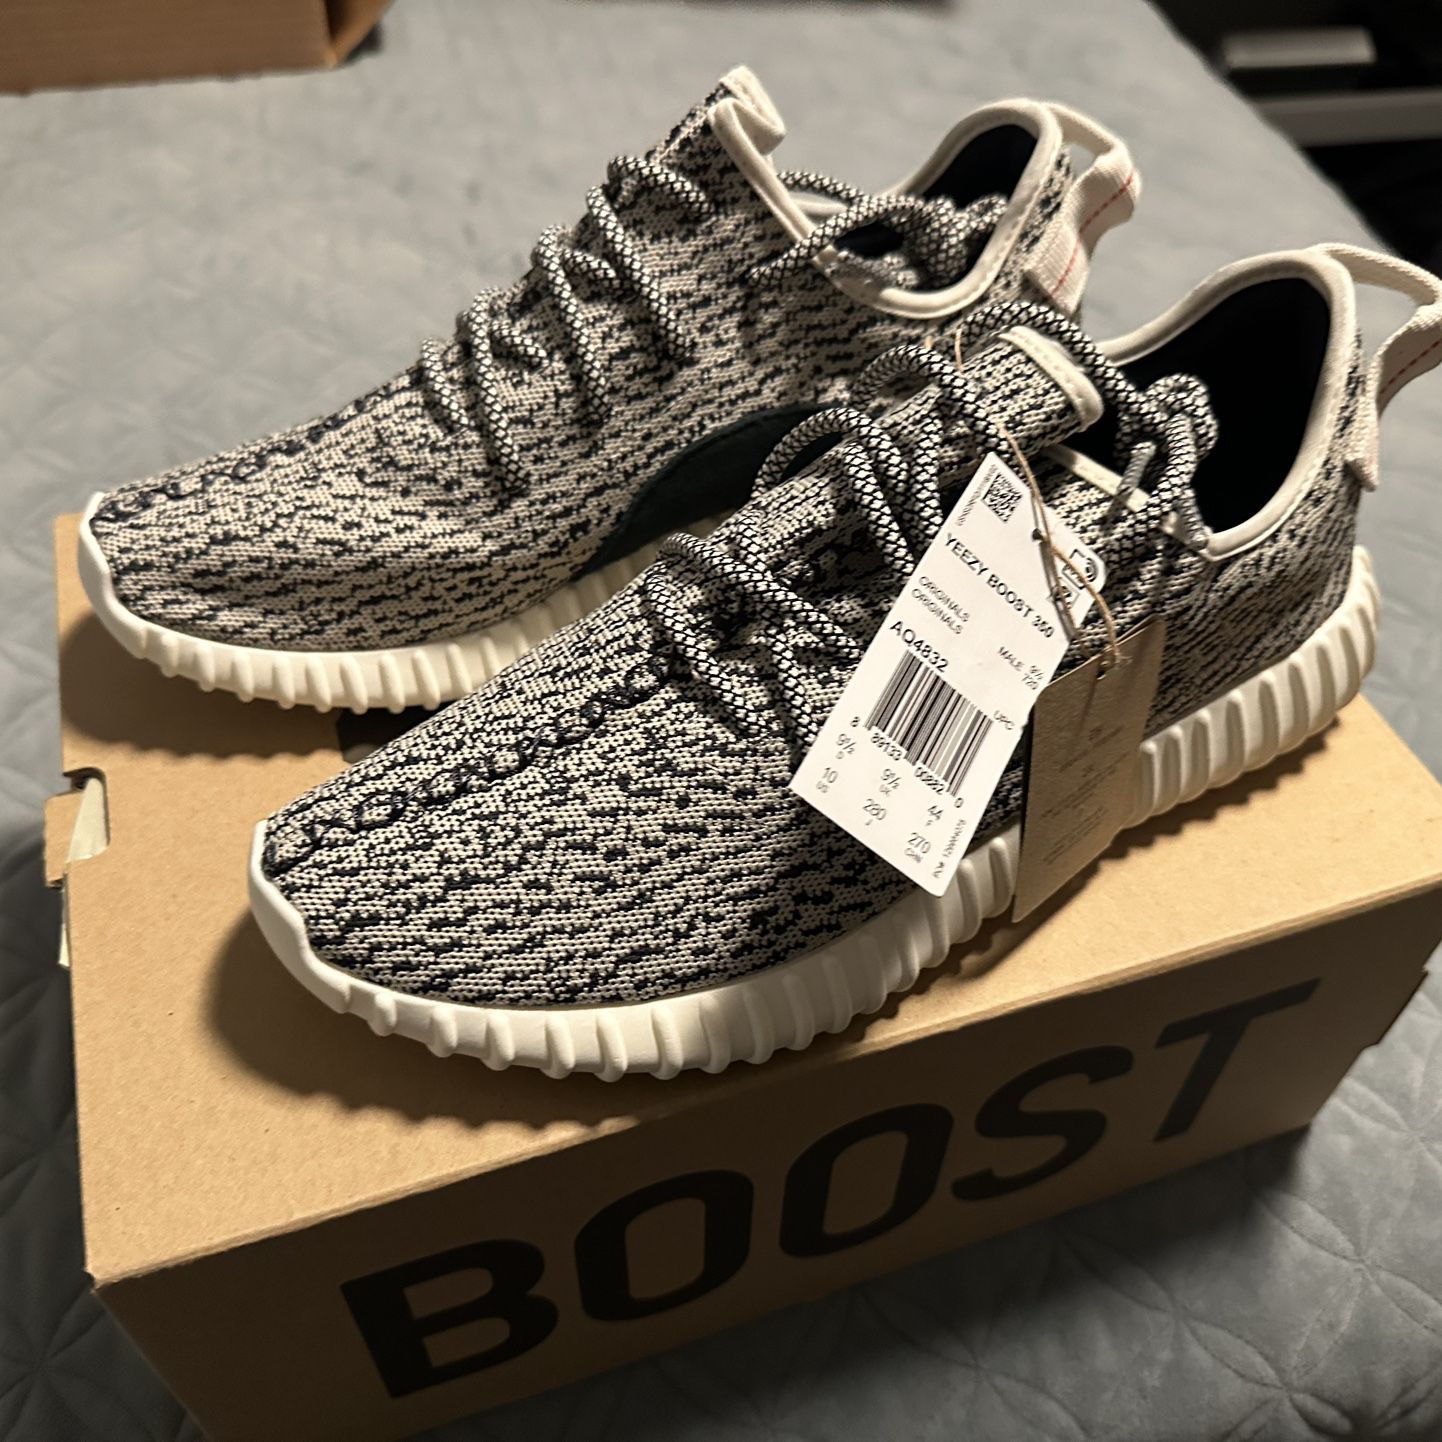 Yeezy Boost 350 TURTLE/BLUGRA/CWHIlE